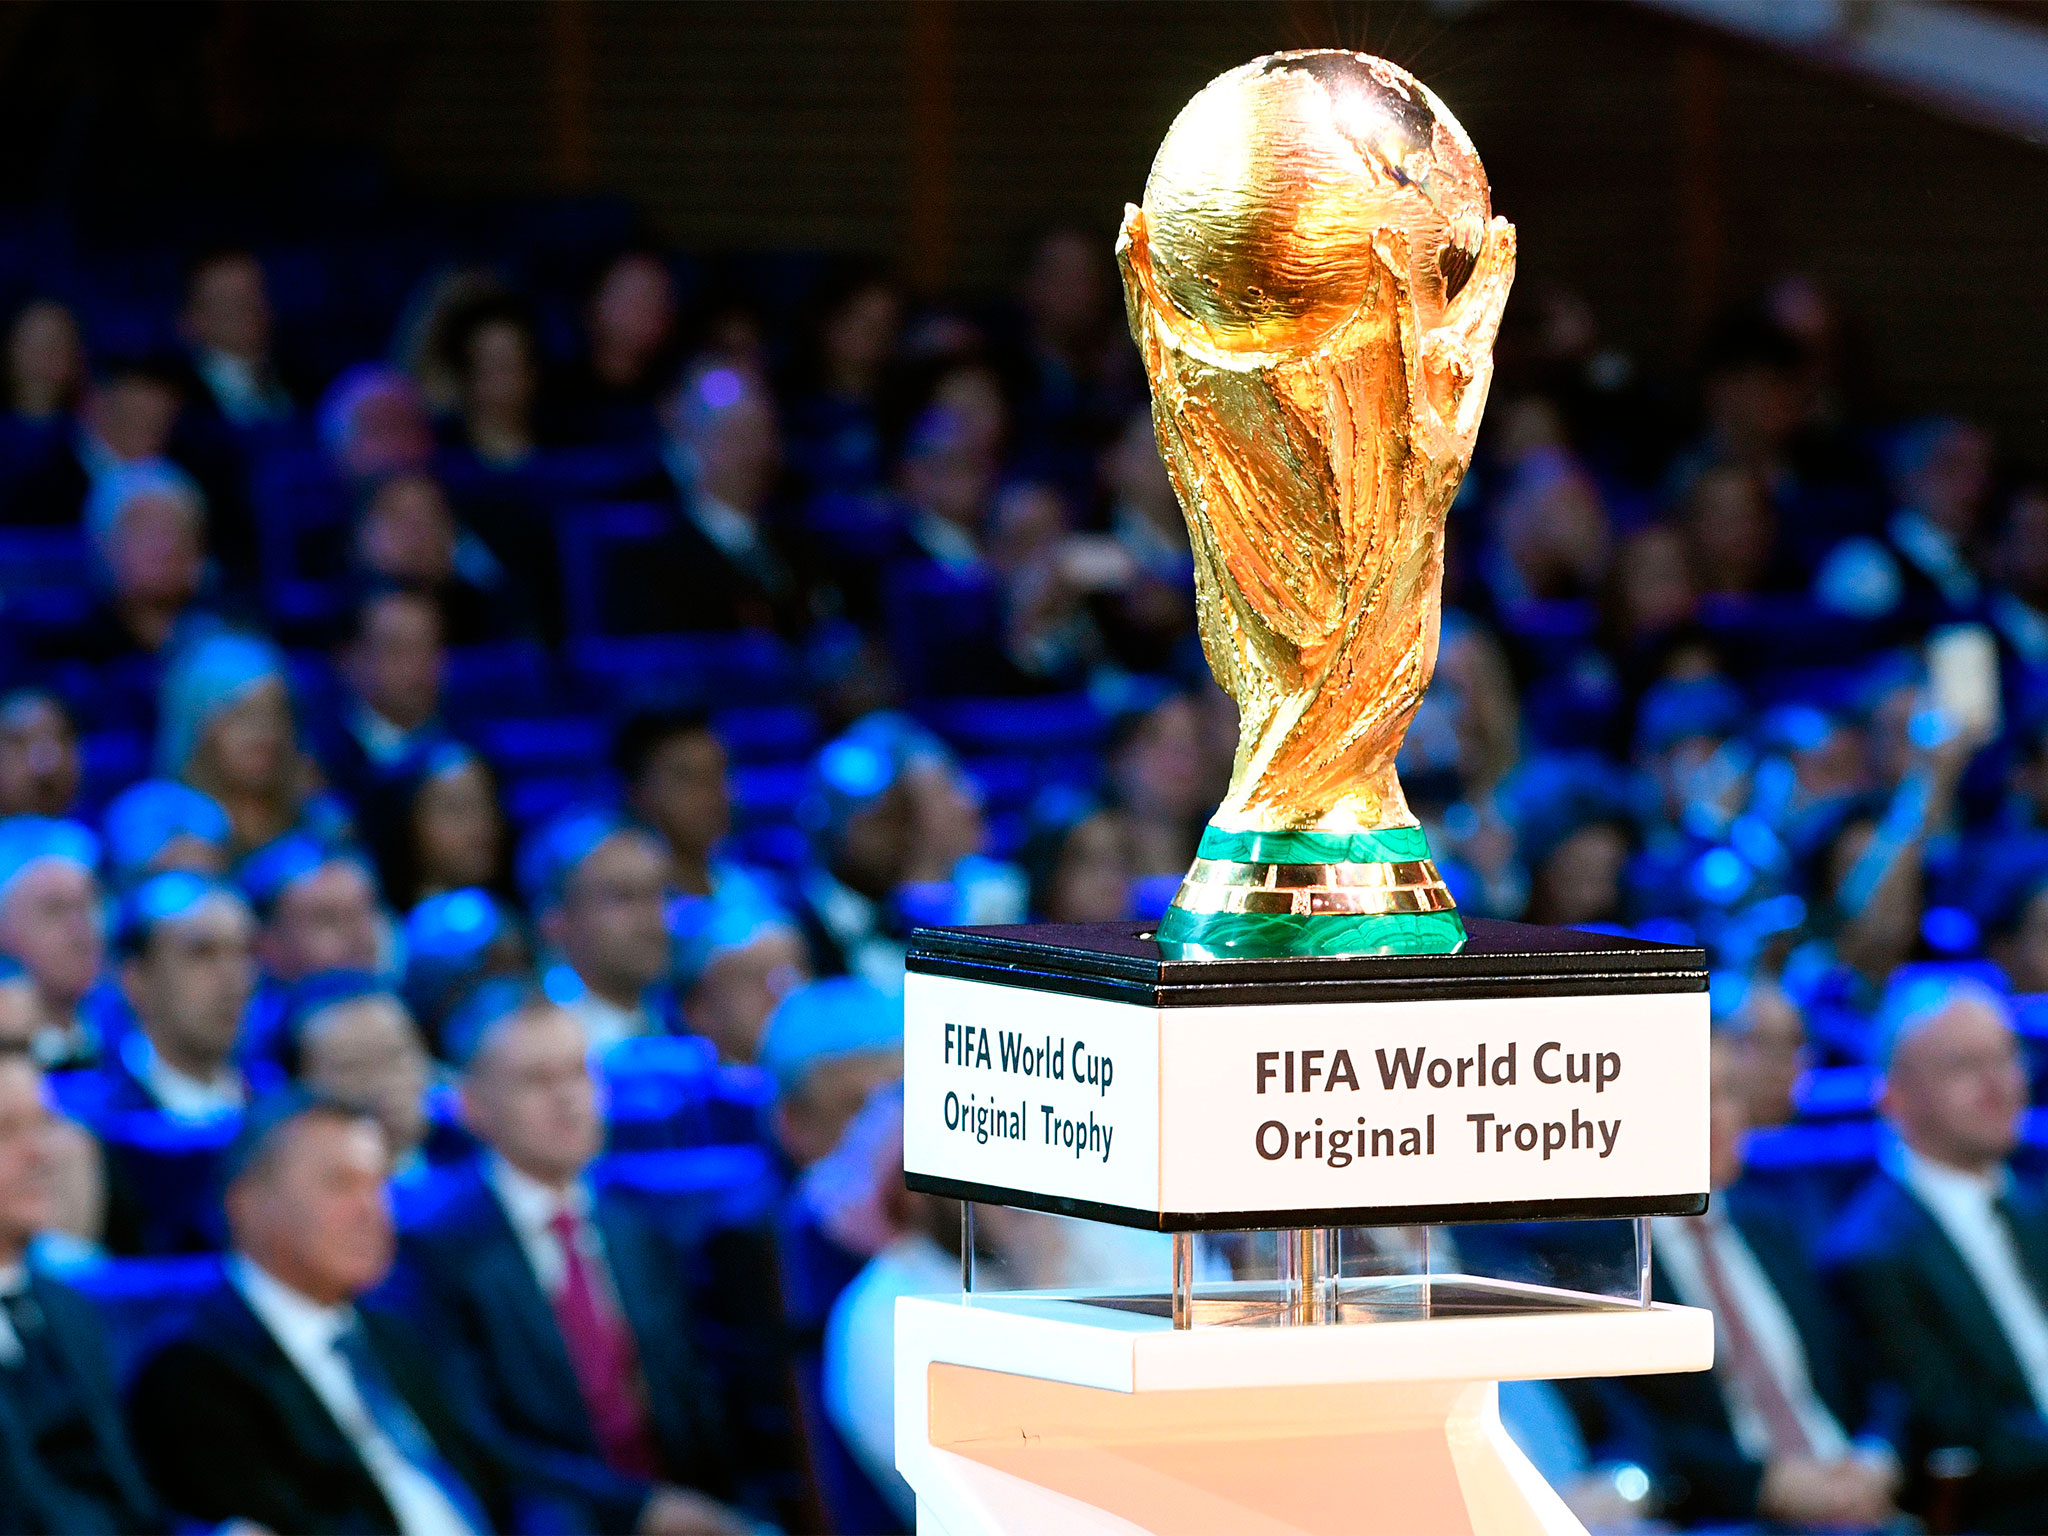 The history of FIFA World Cup trophy